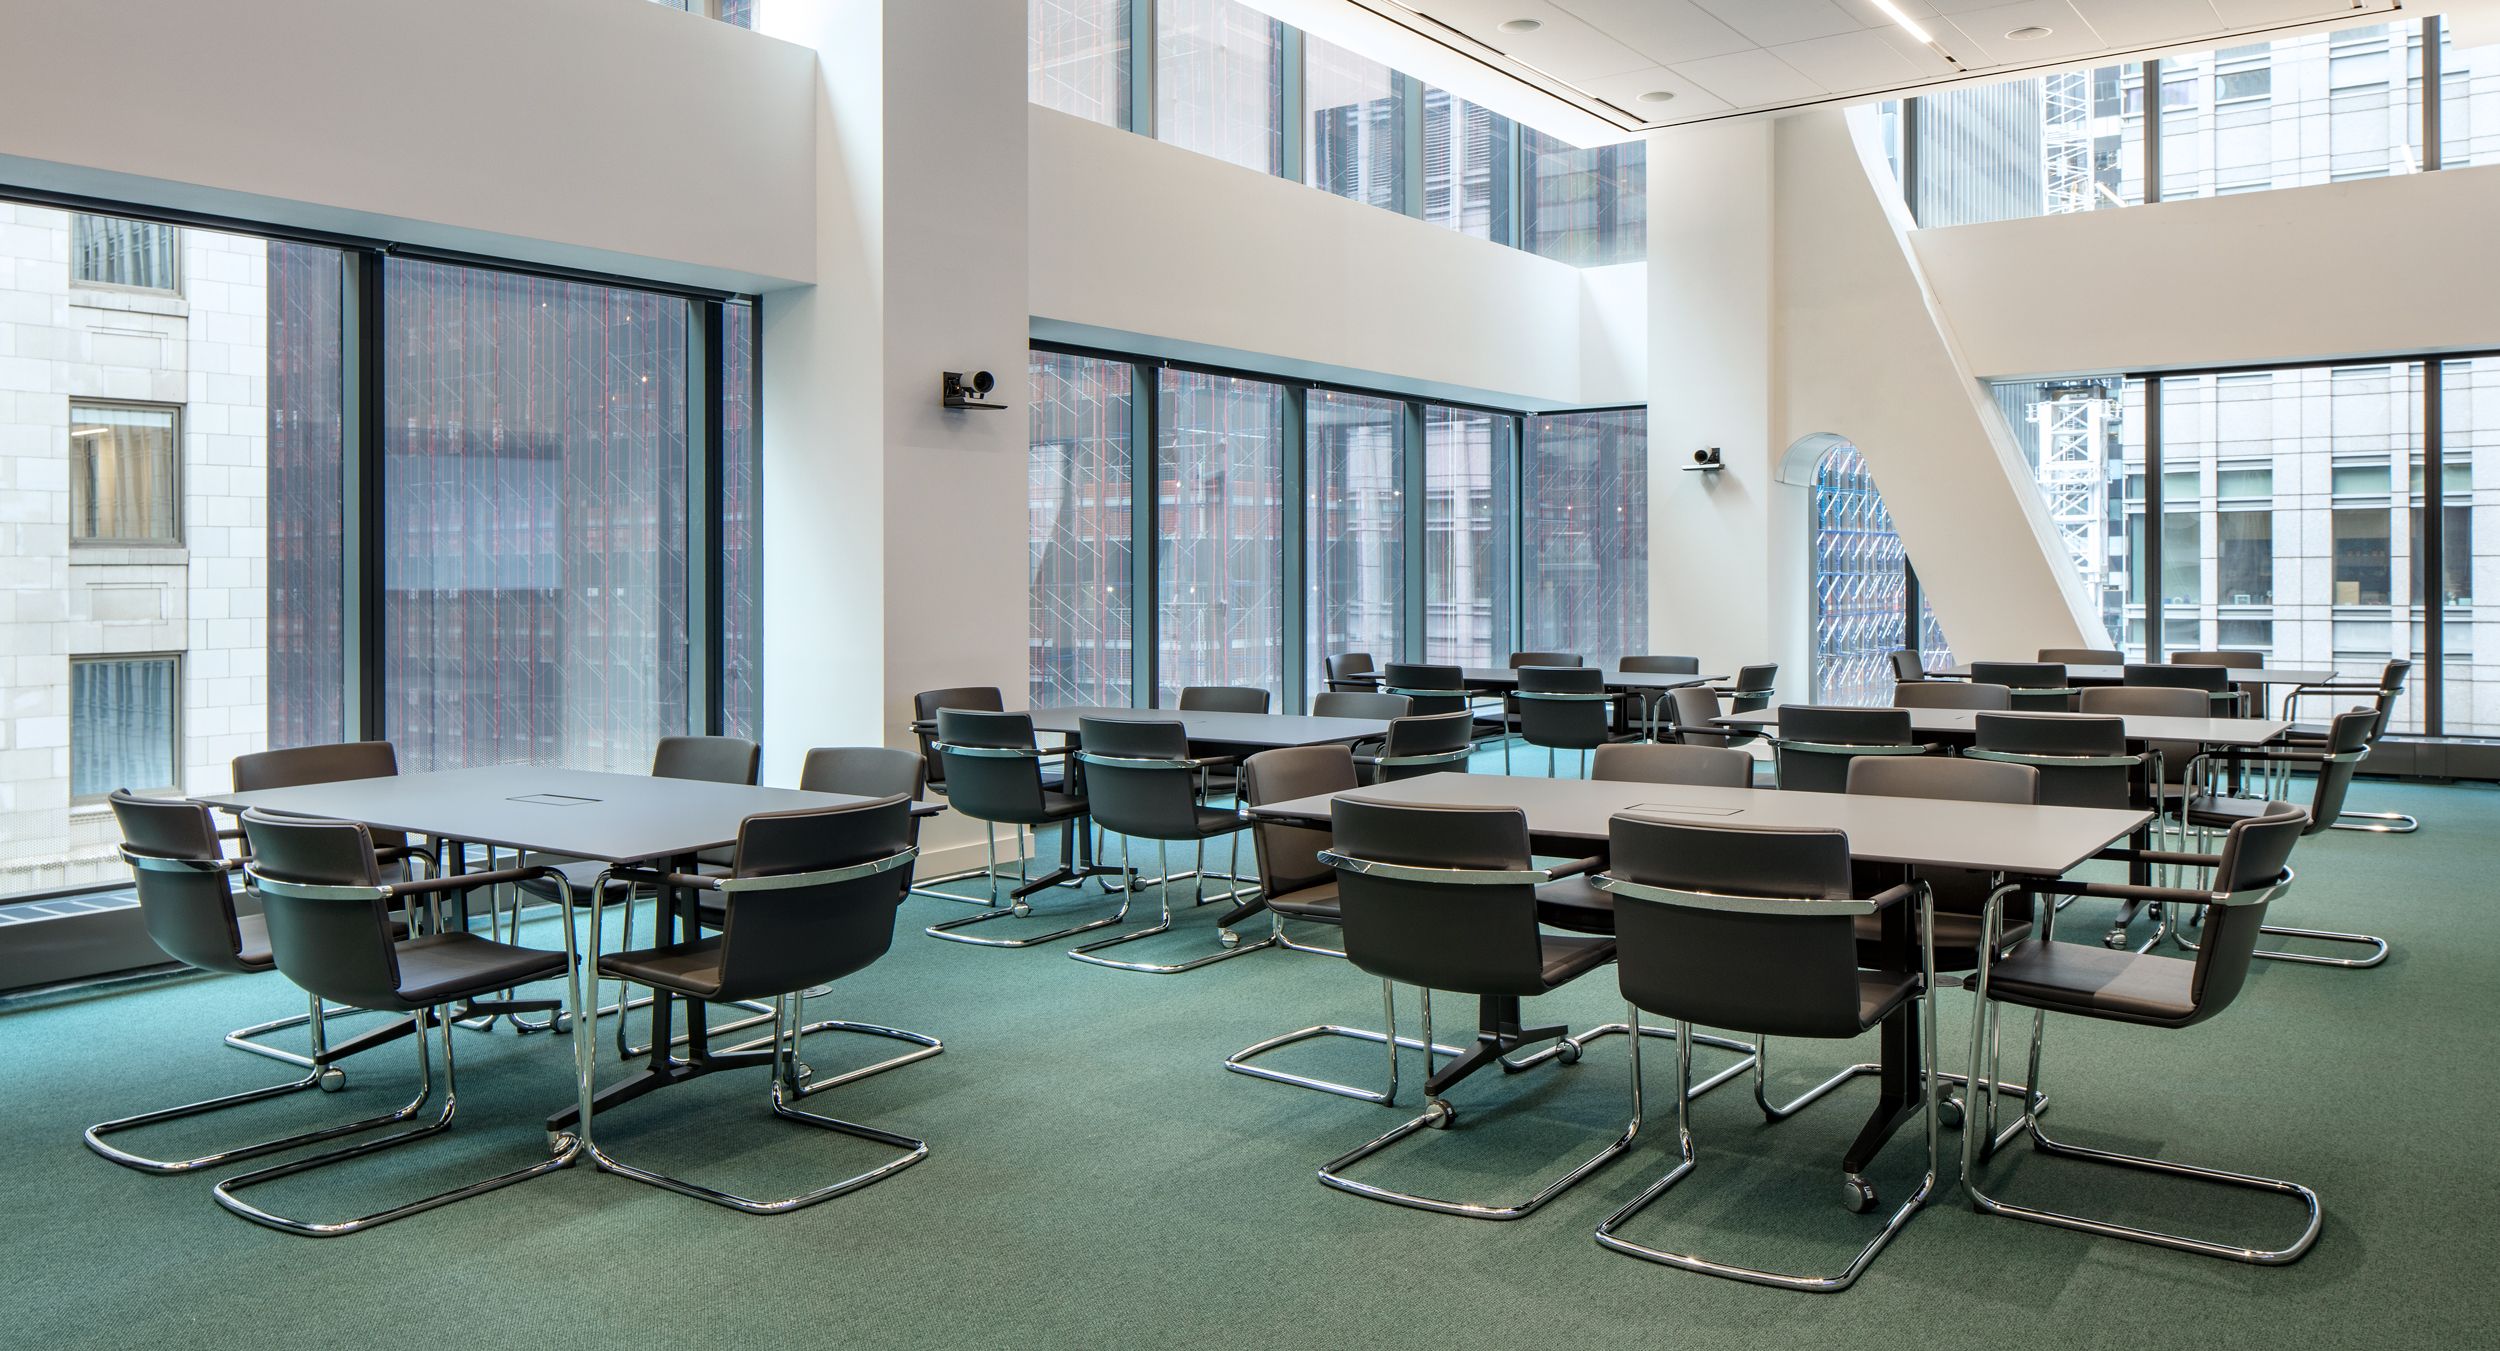 SKILL tables effortlessly reconfigure to maximize flexible space with clean modern lines.